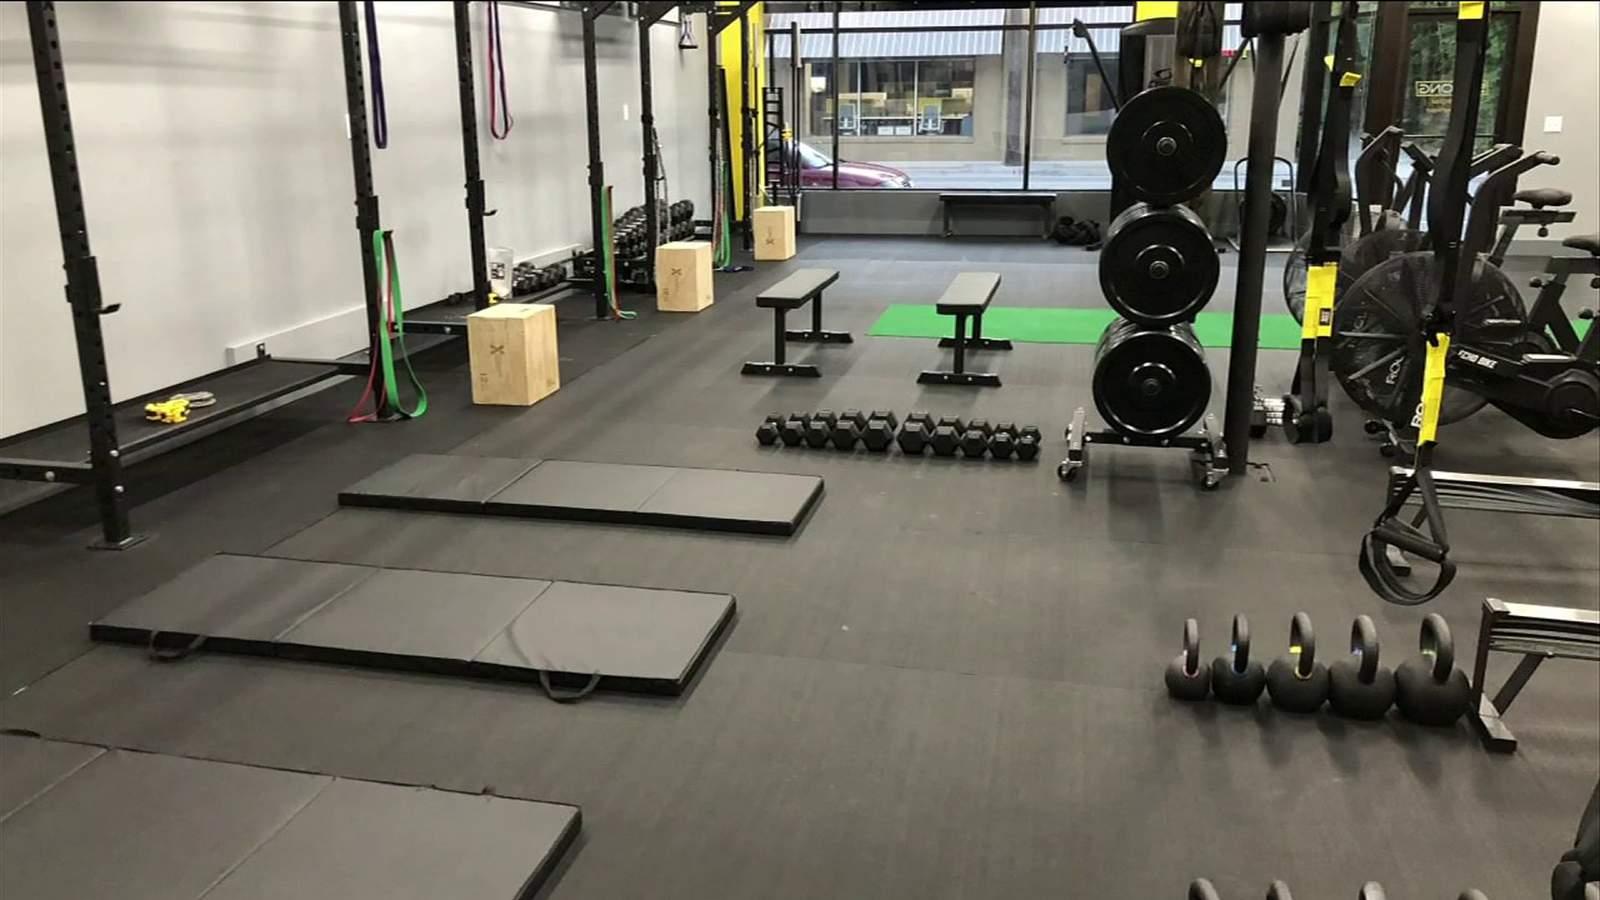 Gov. DeSantis says announcement about Florida gyms coming Friday